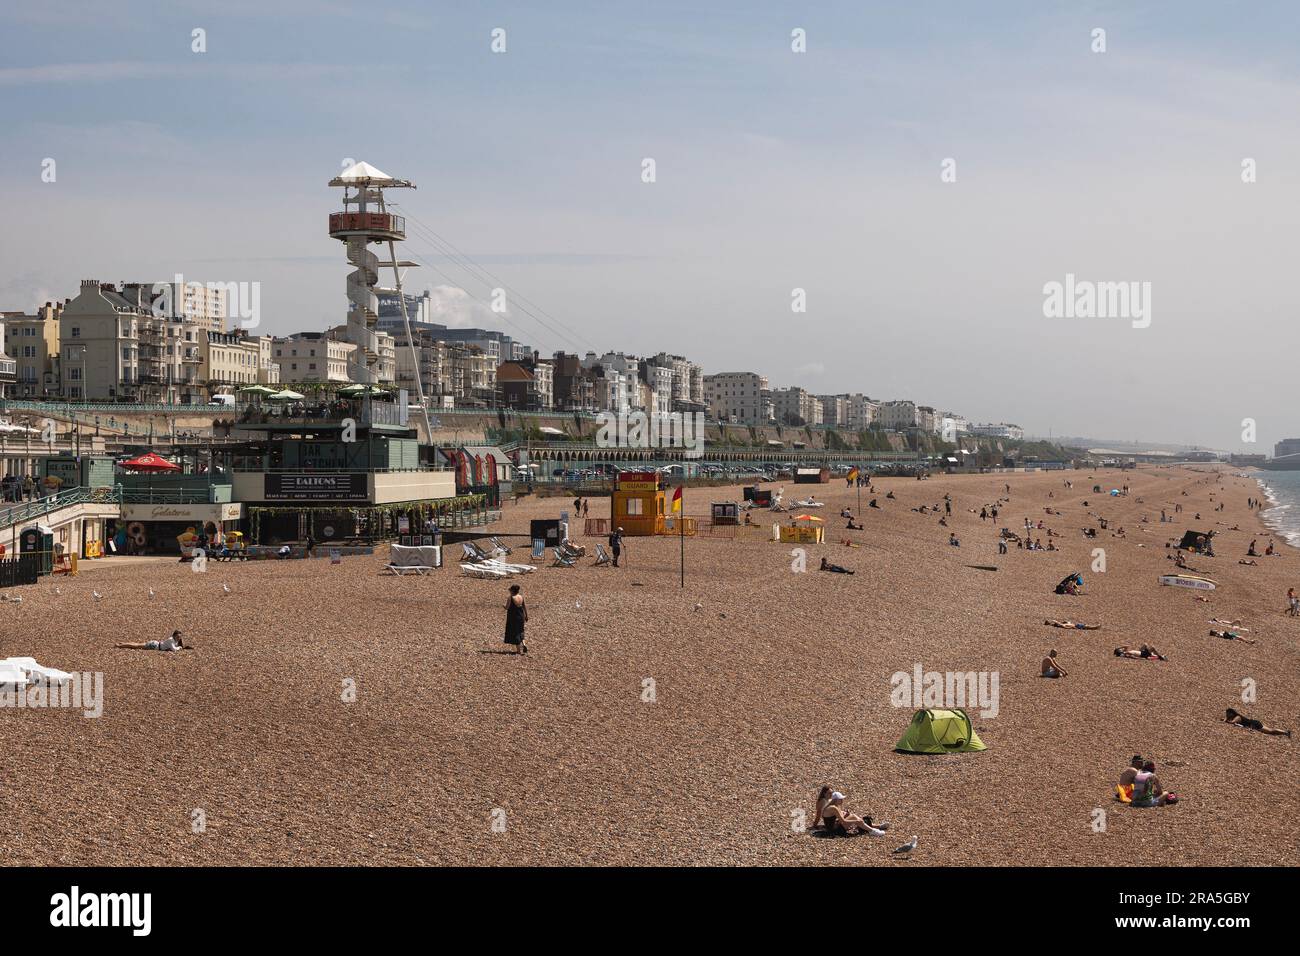 Looking north east from palace pier in Brighton, UK Stock Photo